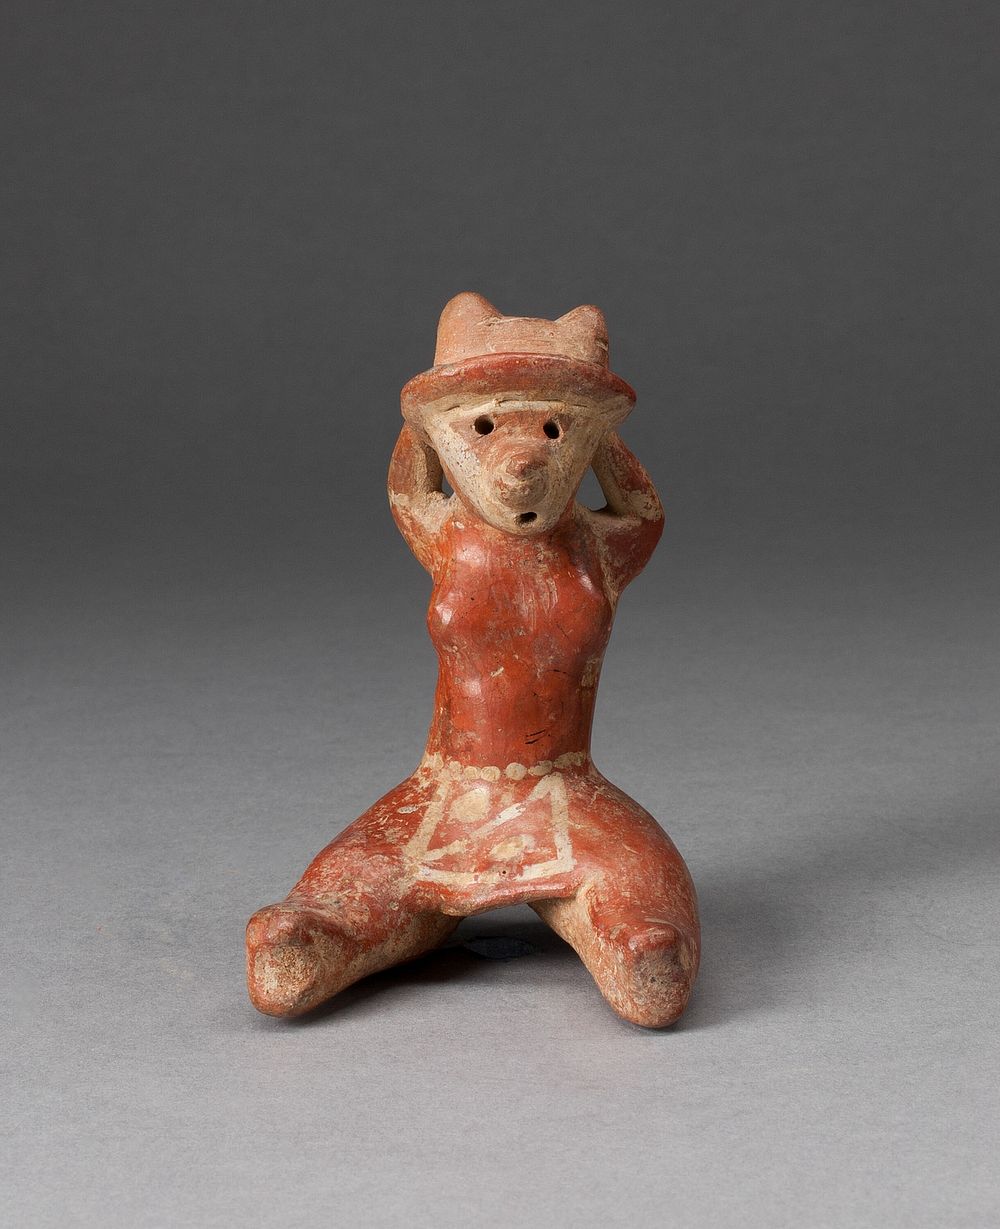 Miniature Seated Figurine with Arms Held Behind the Head by Nayarit